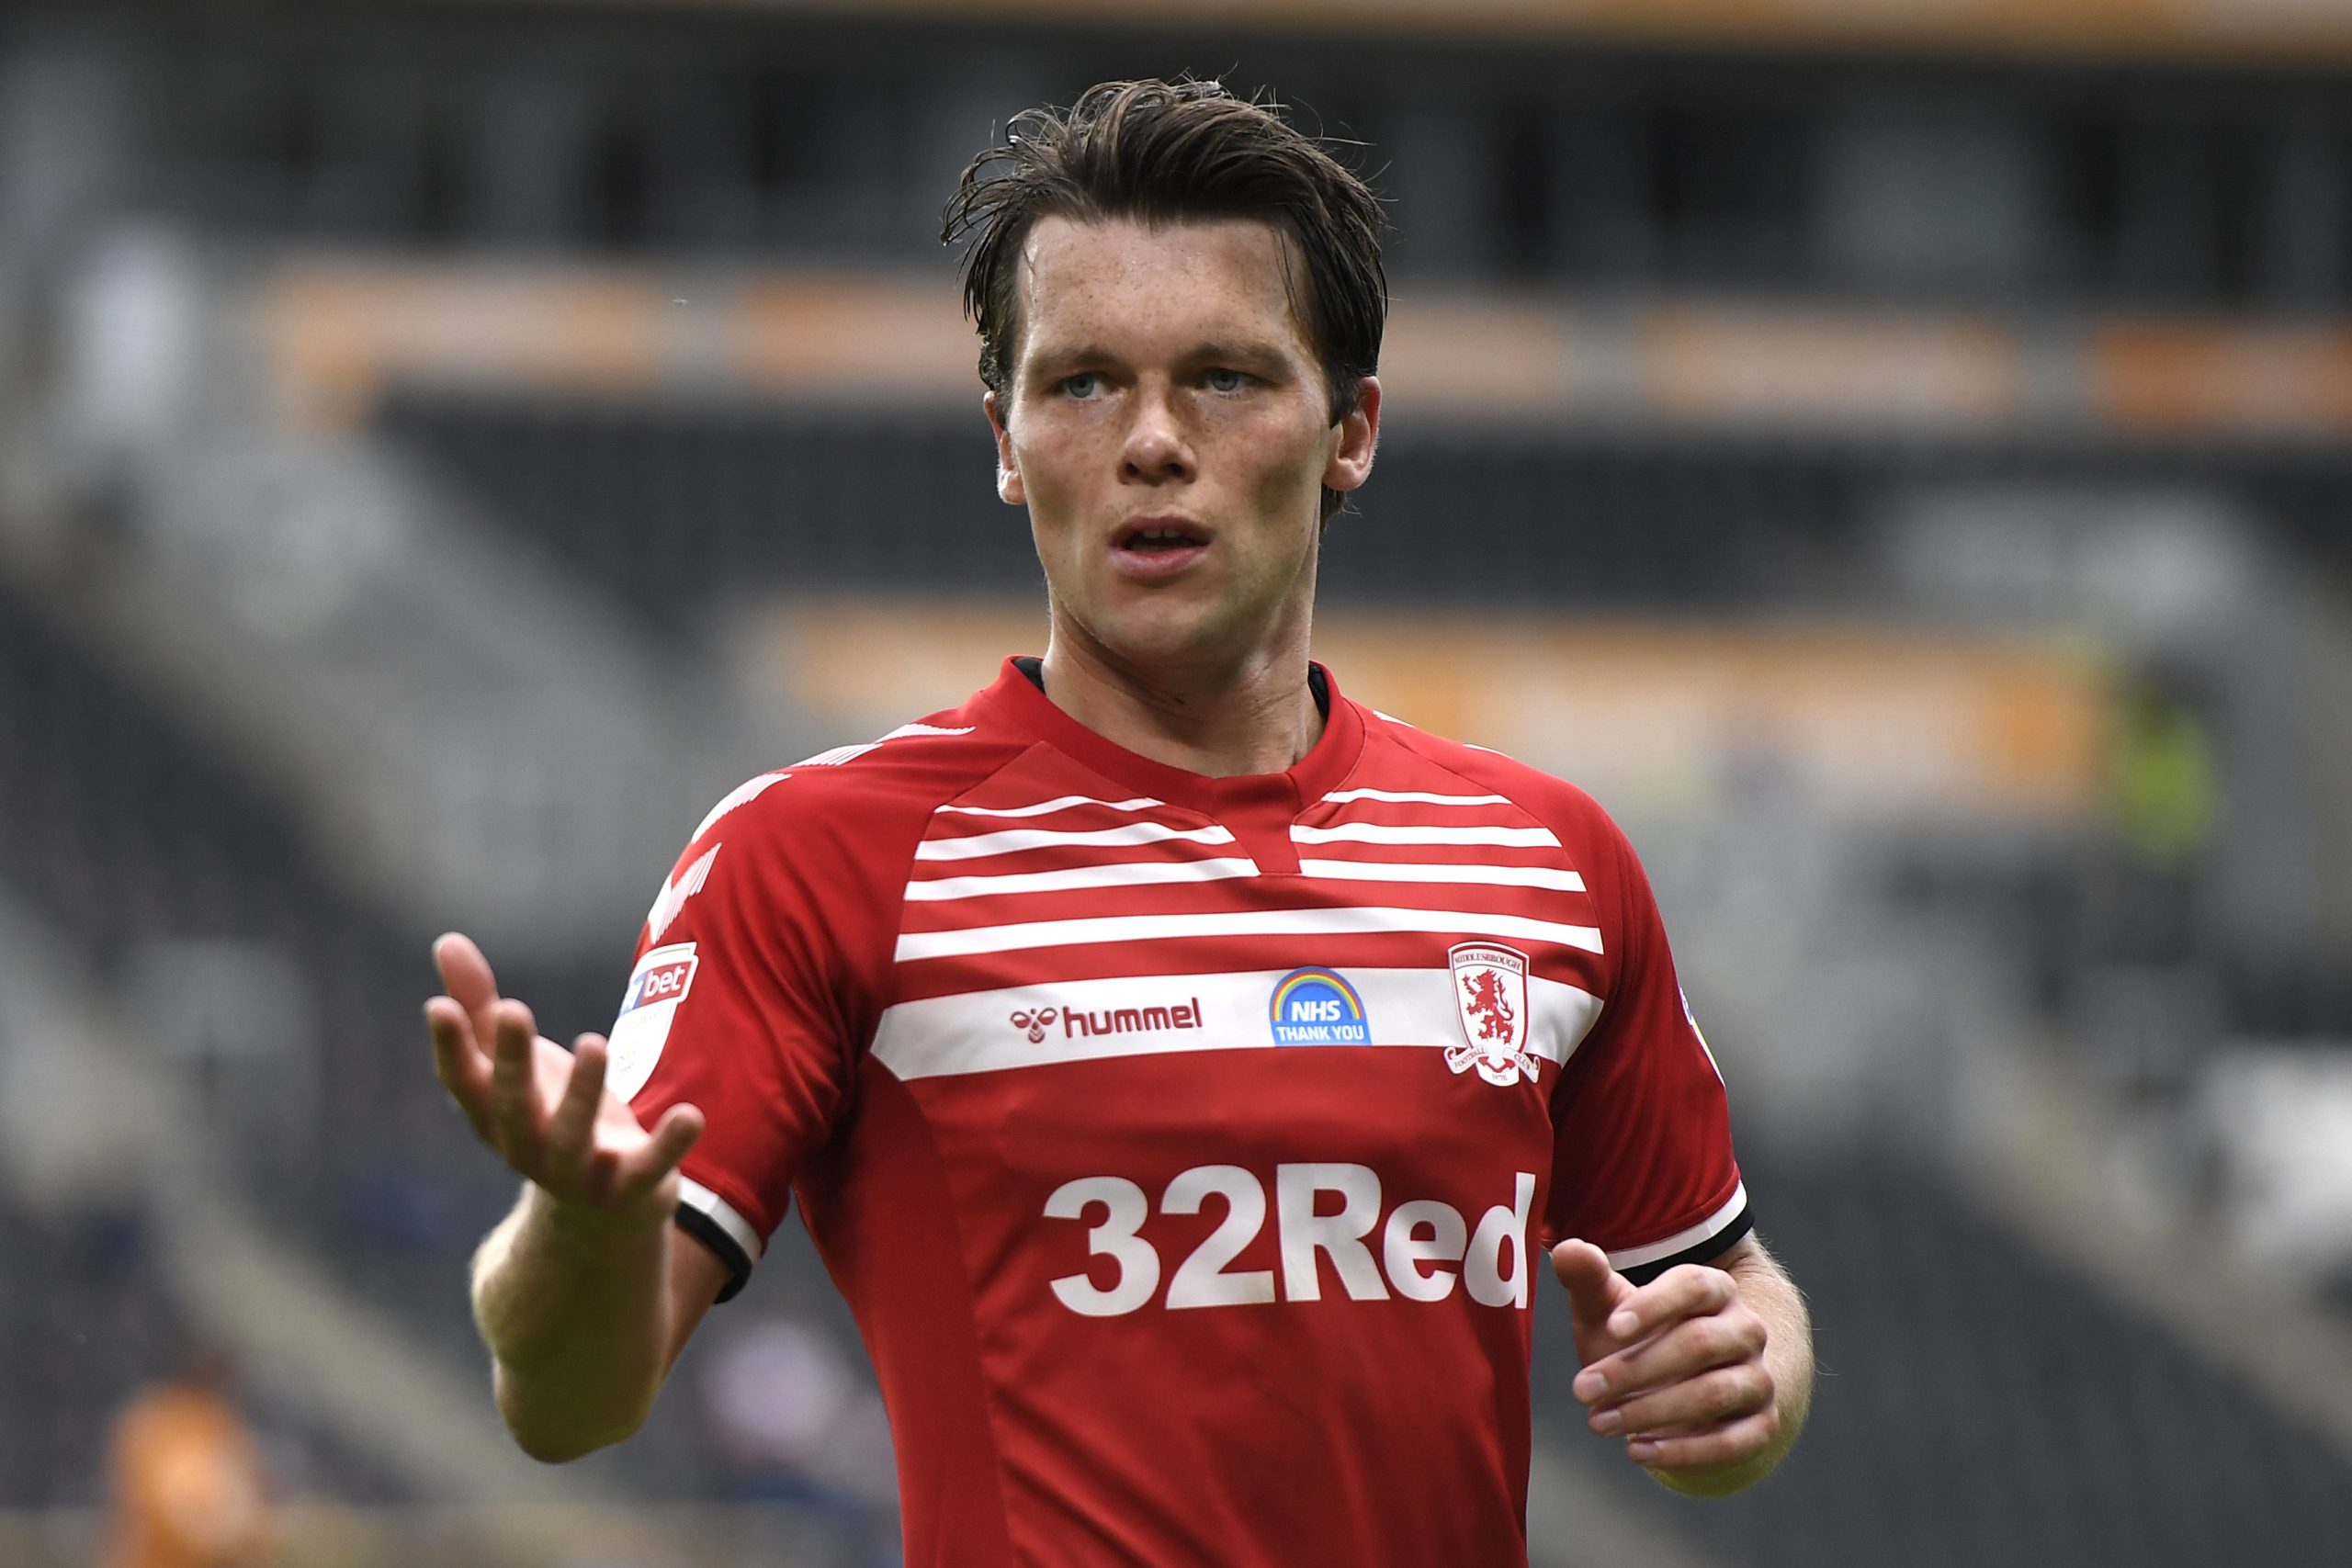 HULL, ENGLAND - JULY 02: Jonny Howson of Middlesbrough during the Sky Bet Championship match between Hull City and Middlesbrough at KCOM Stadium on July 02, 2020 in Hull, England. (Photo by George Wood/Getty Images)